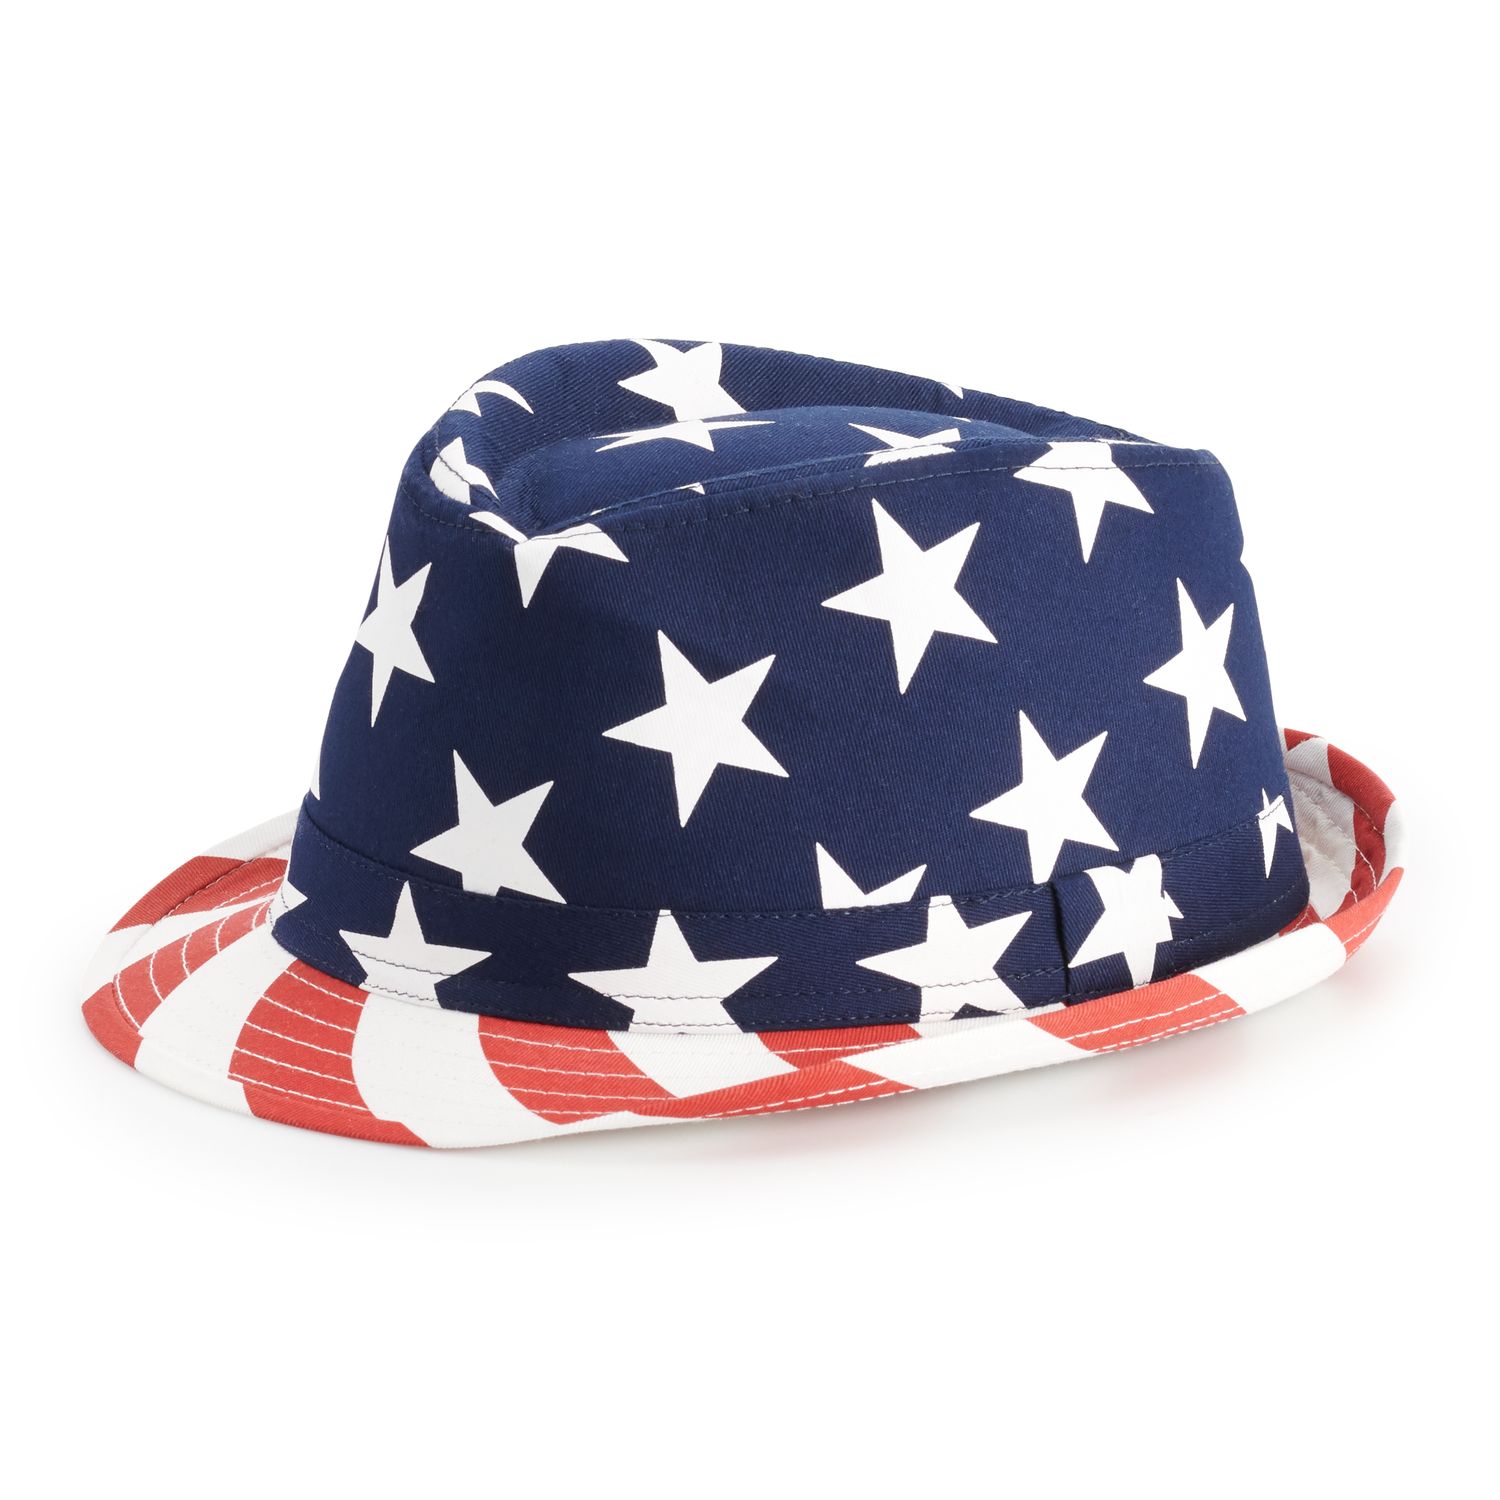 NWT The Childrens Place American Stars & Stripes Bucket Hat Toddler M/L 3-5T